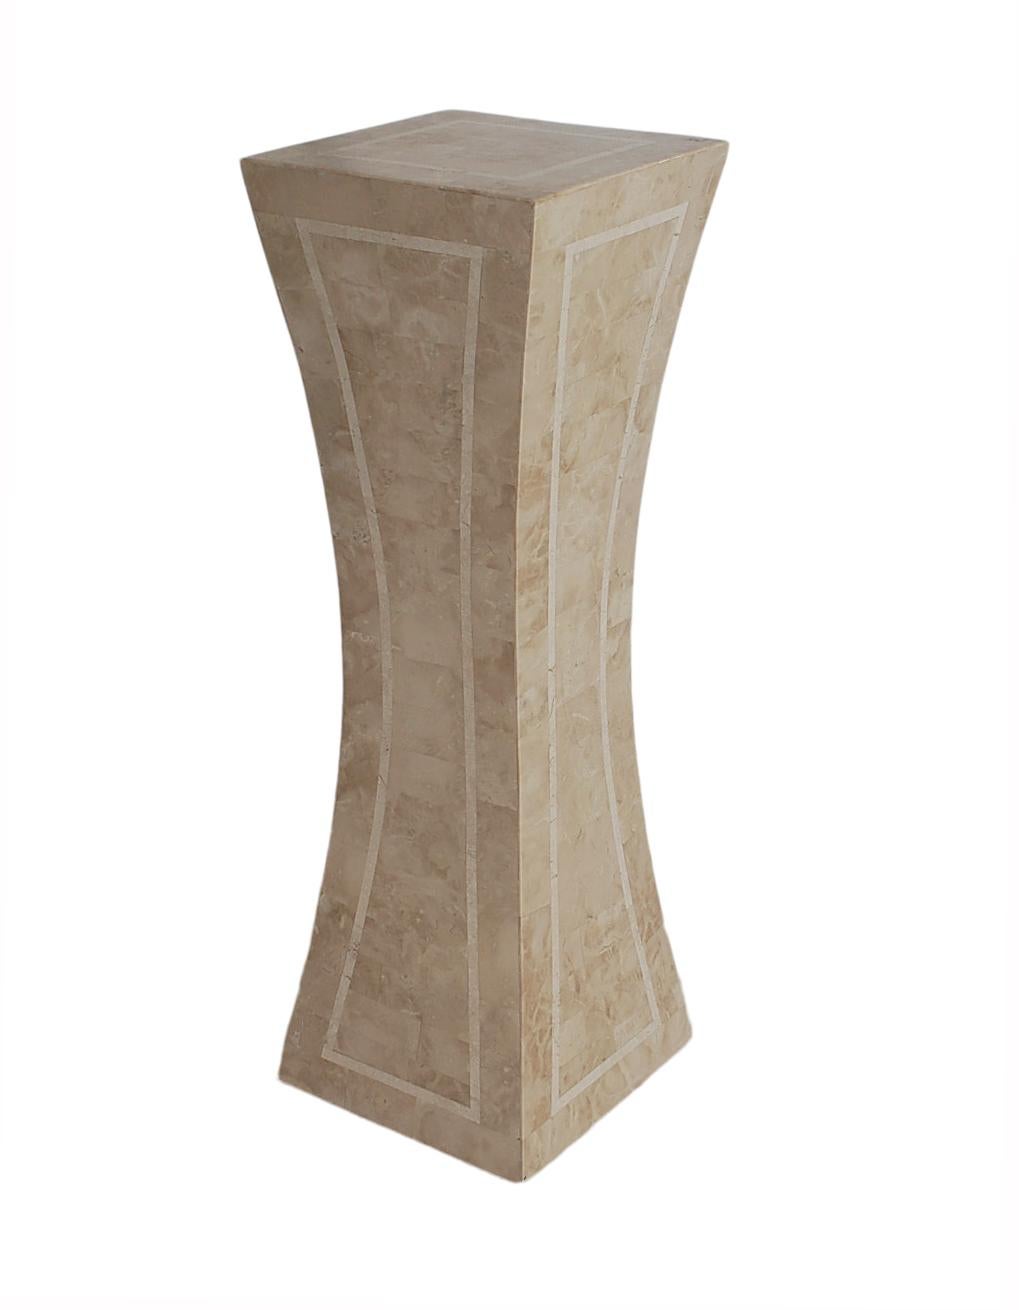 Philippine Hollywood Regency Off-White Tessellated Stone or Marble Tall Display Pedestal